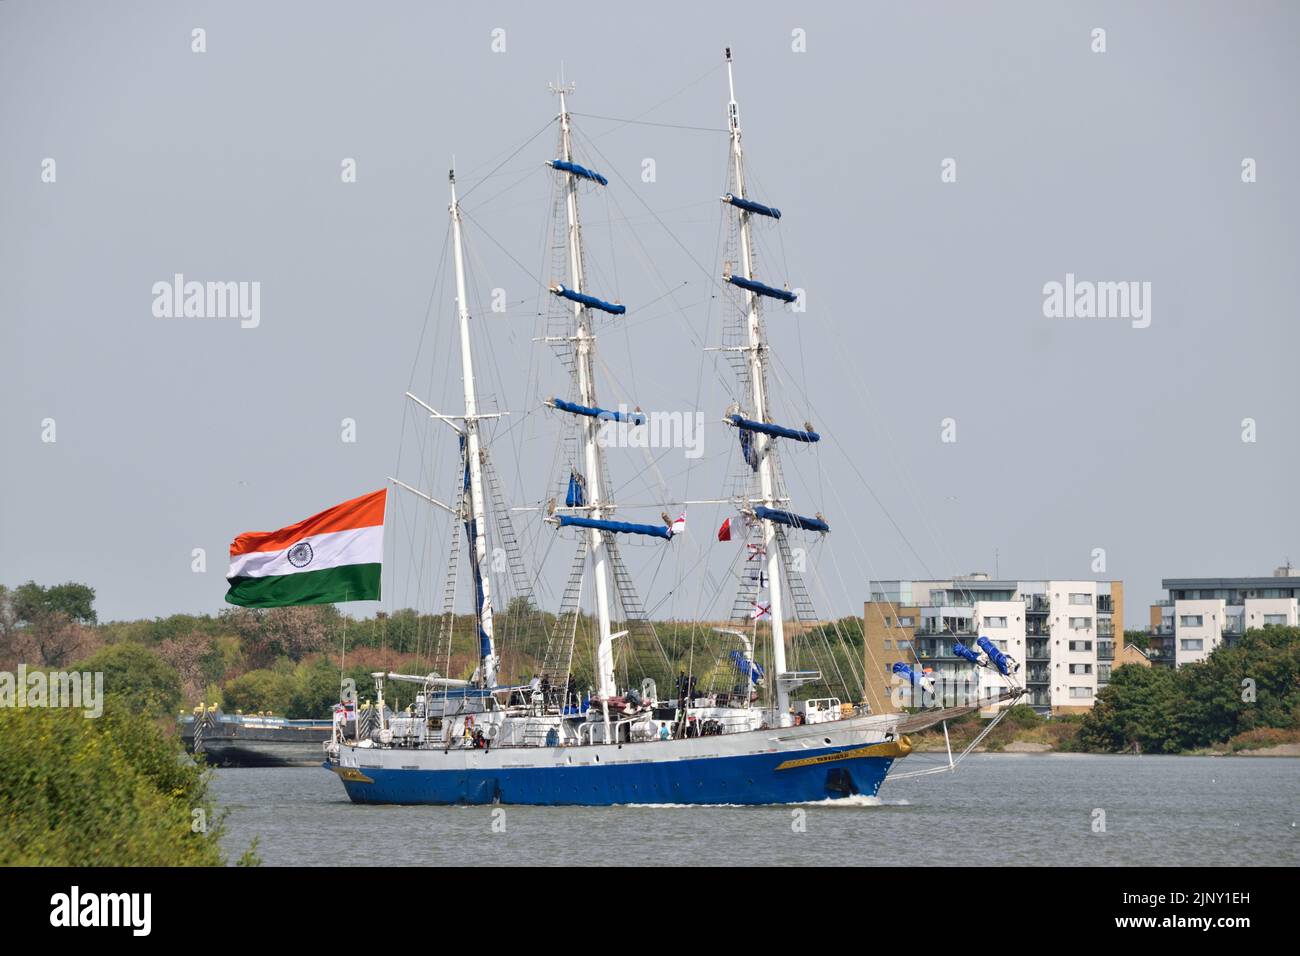 Arriving on the Thames  NS TARANGINI A75, the Indian Navy's sail training ship, staying at West India Doc and visiting London as part of #IndiaAt75 / #AzadiKaAmritMahotsav events. Stock Photo